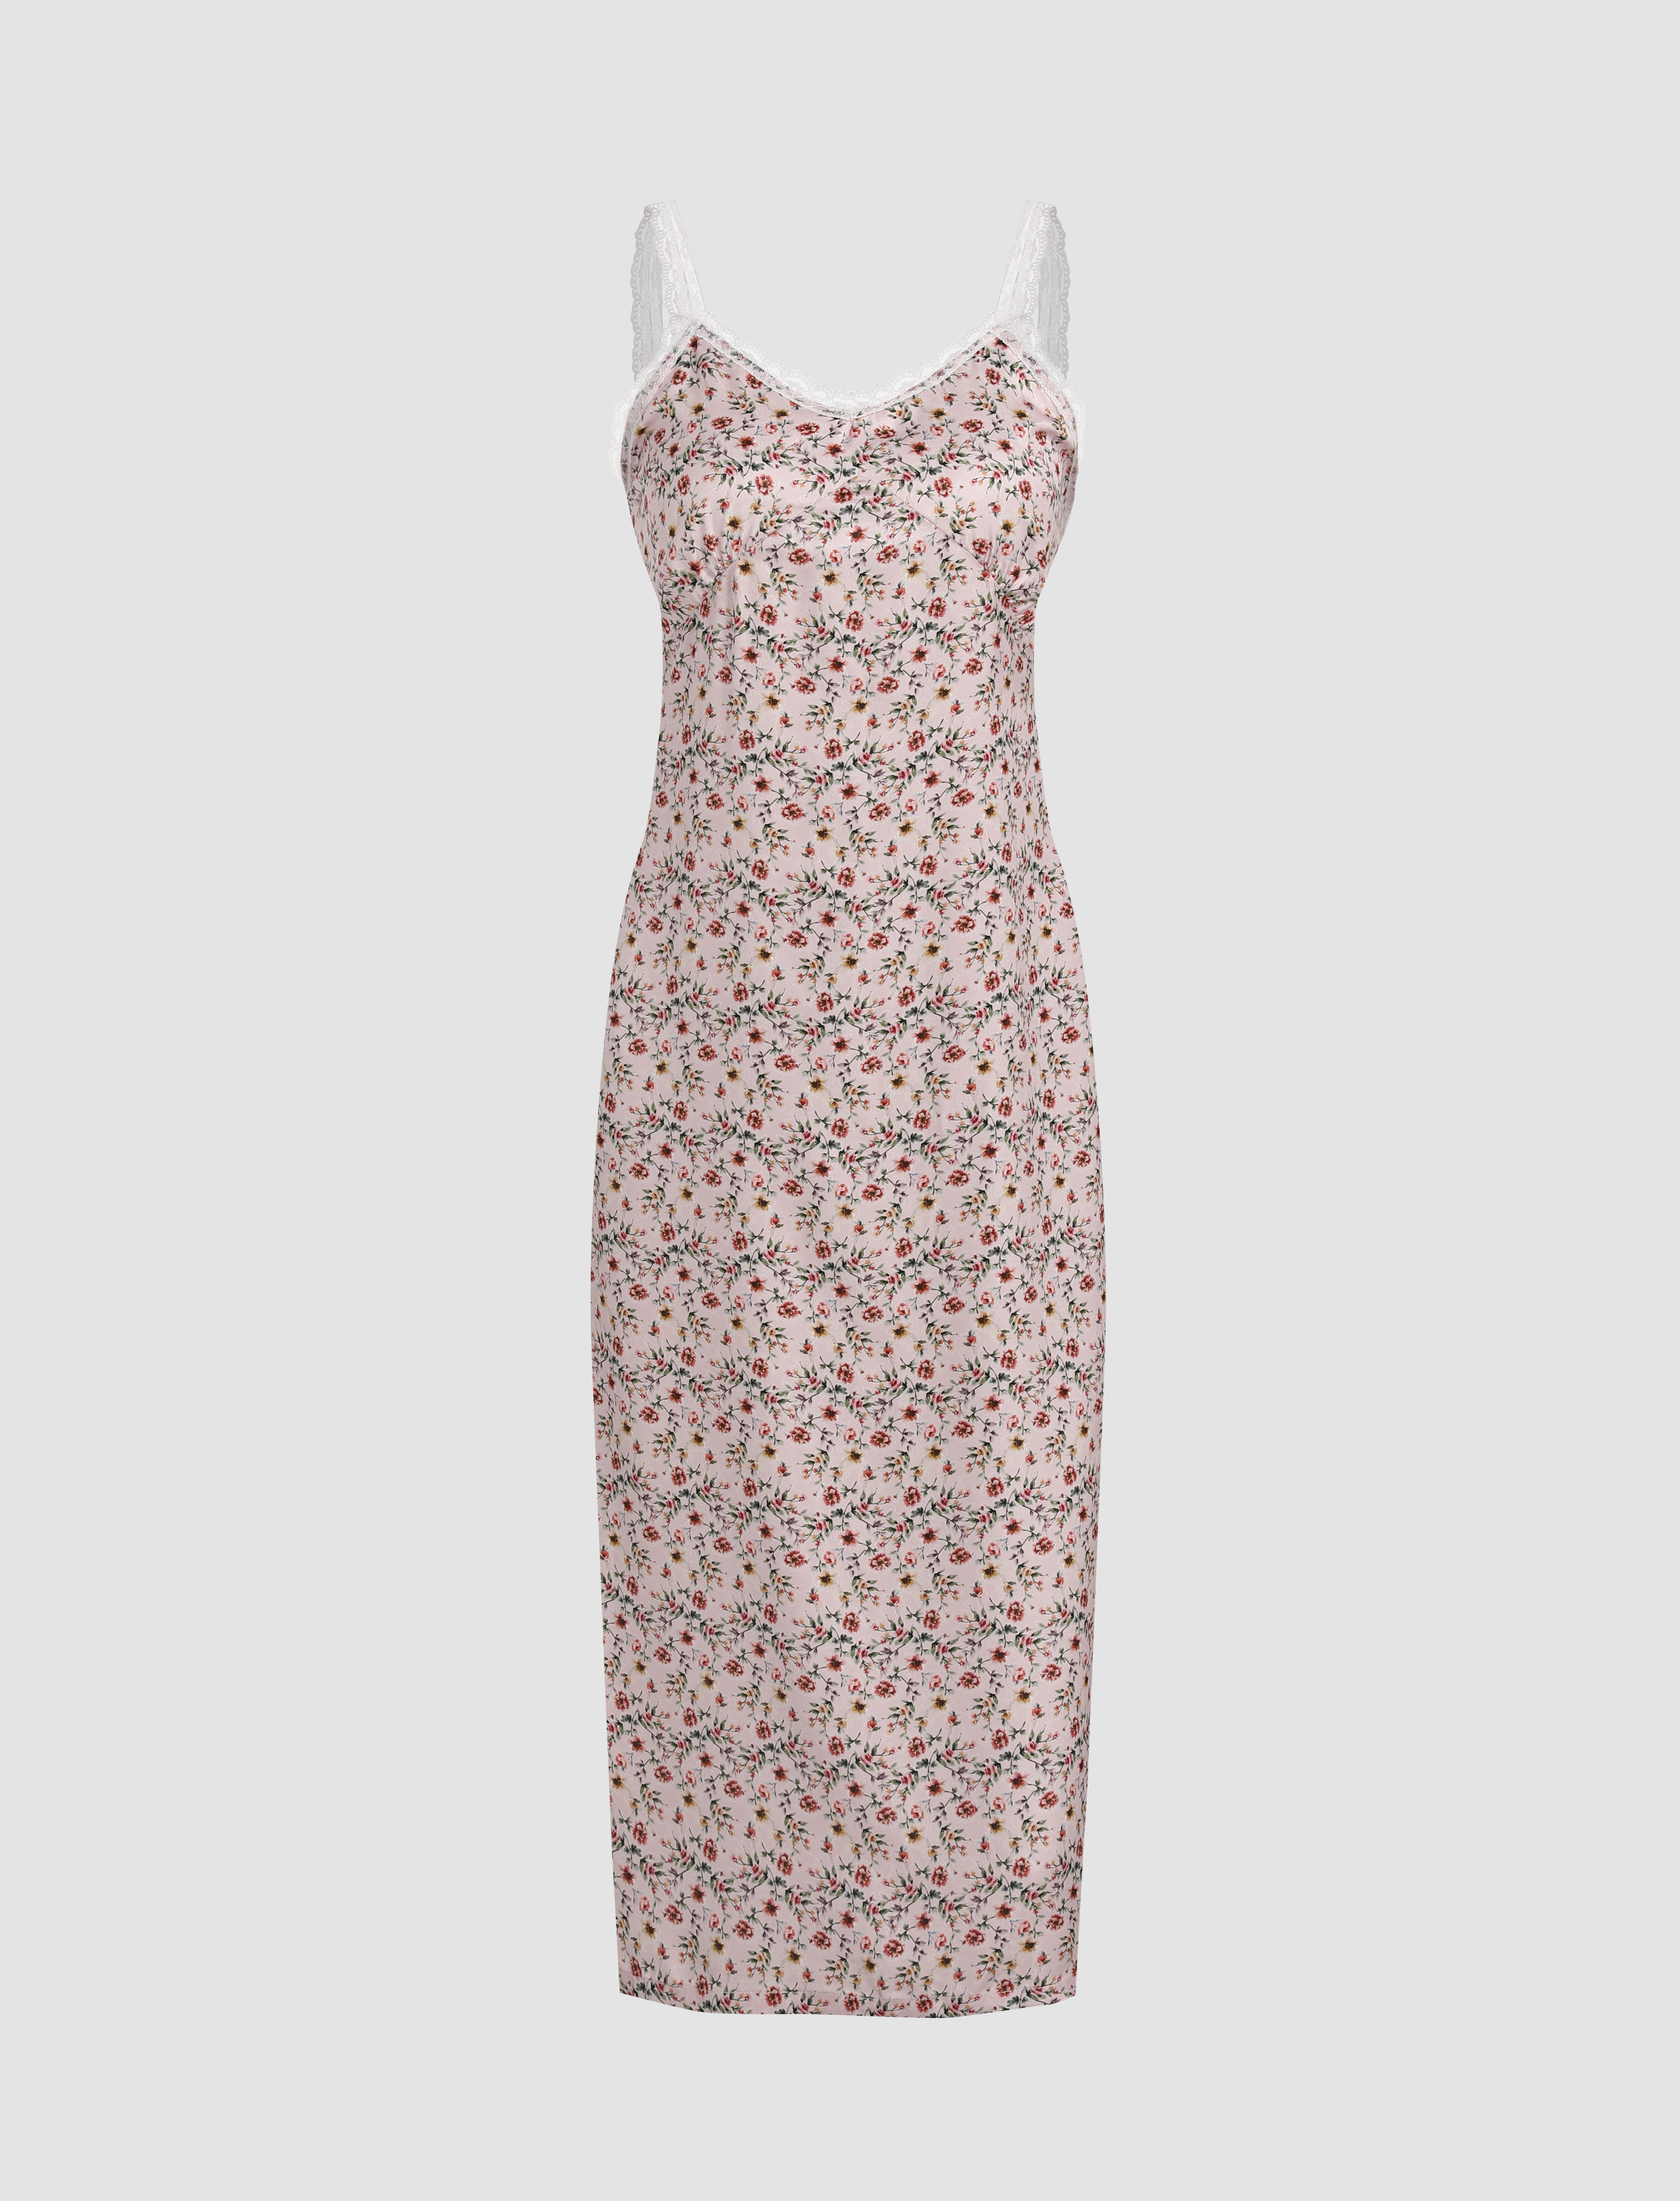 Ditsy Floral Lace Midi Dress - Cider